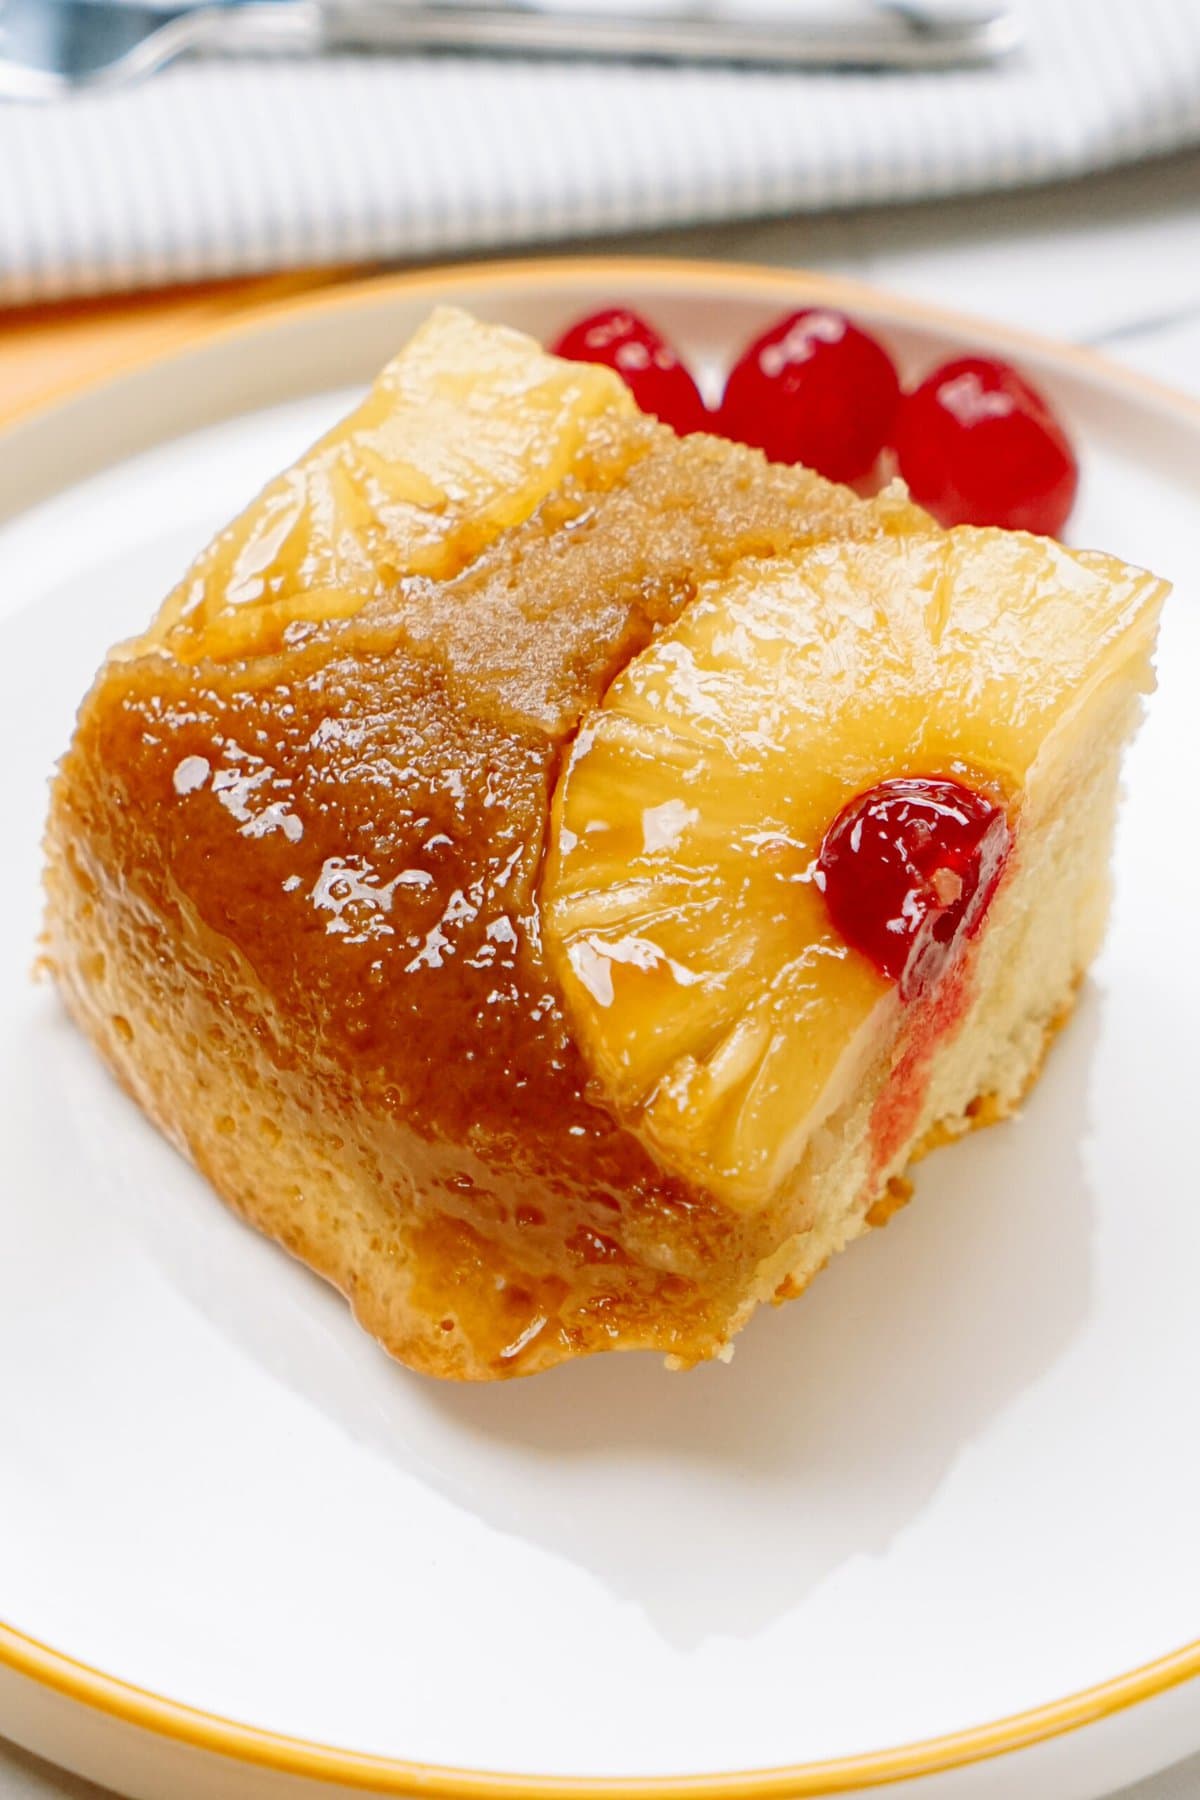 A slice of caramelized pineapple upside-down cake on a plate with cherries.